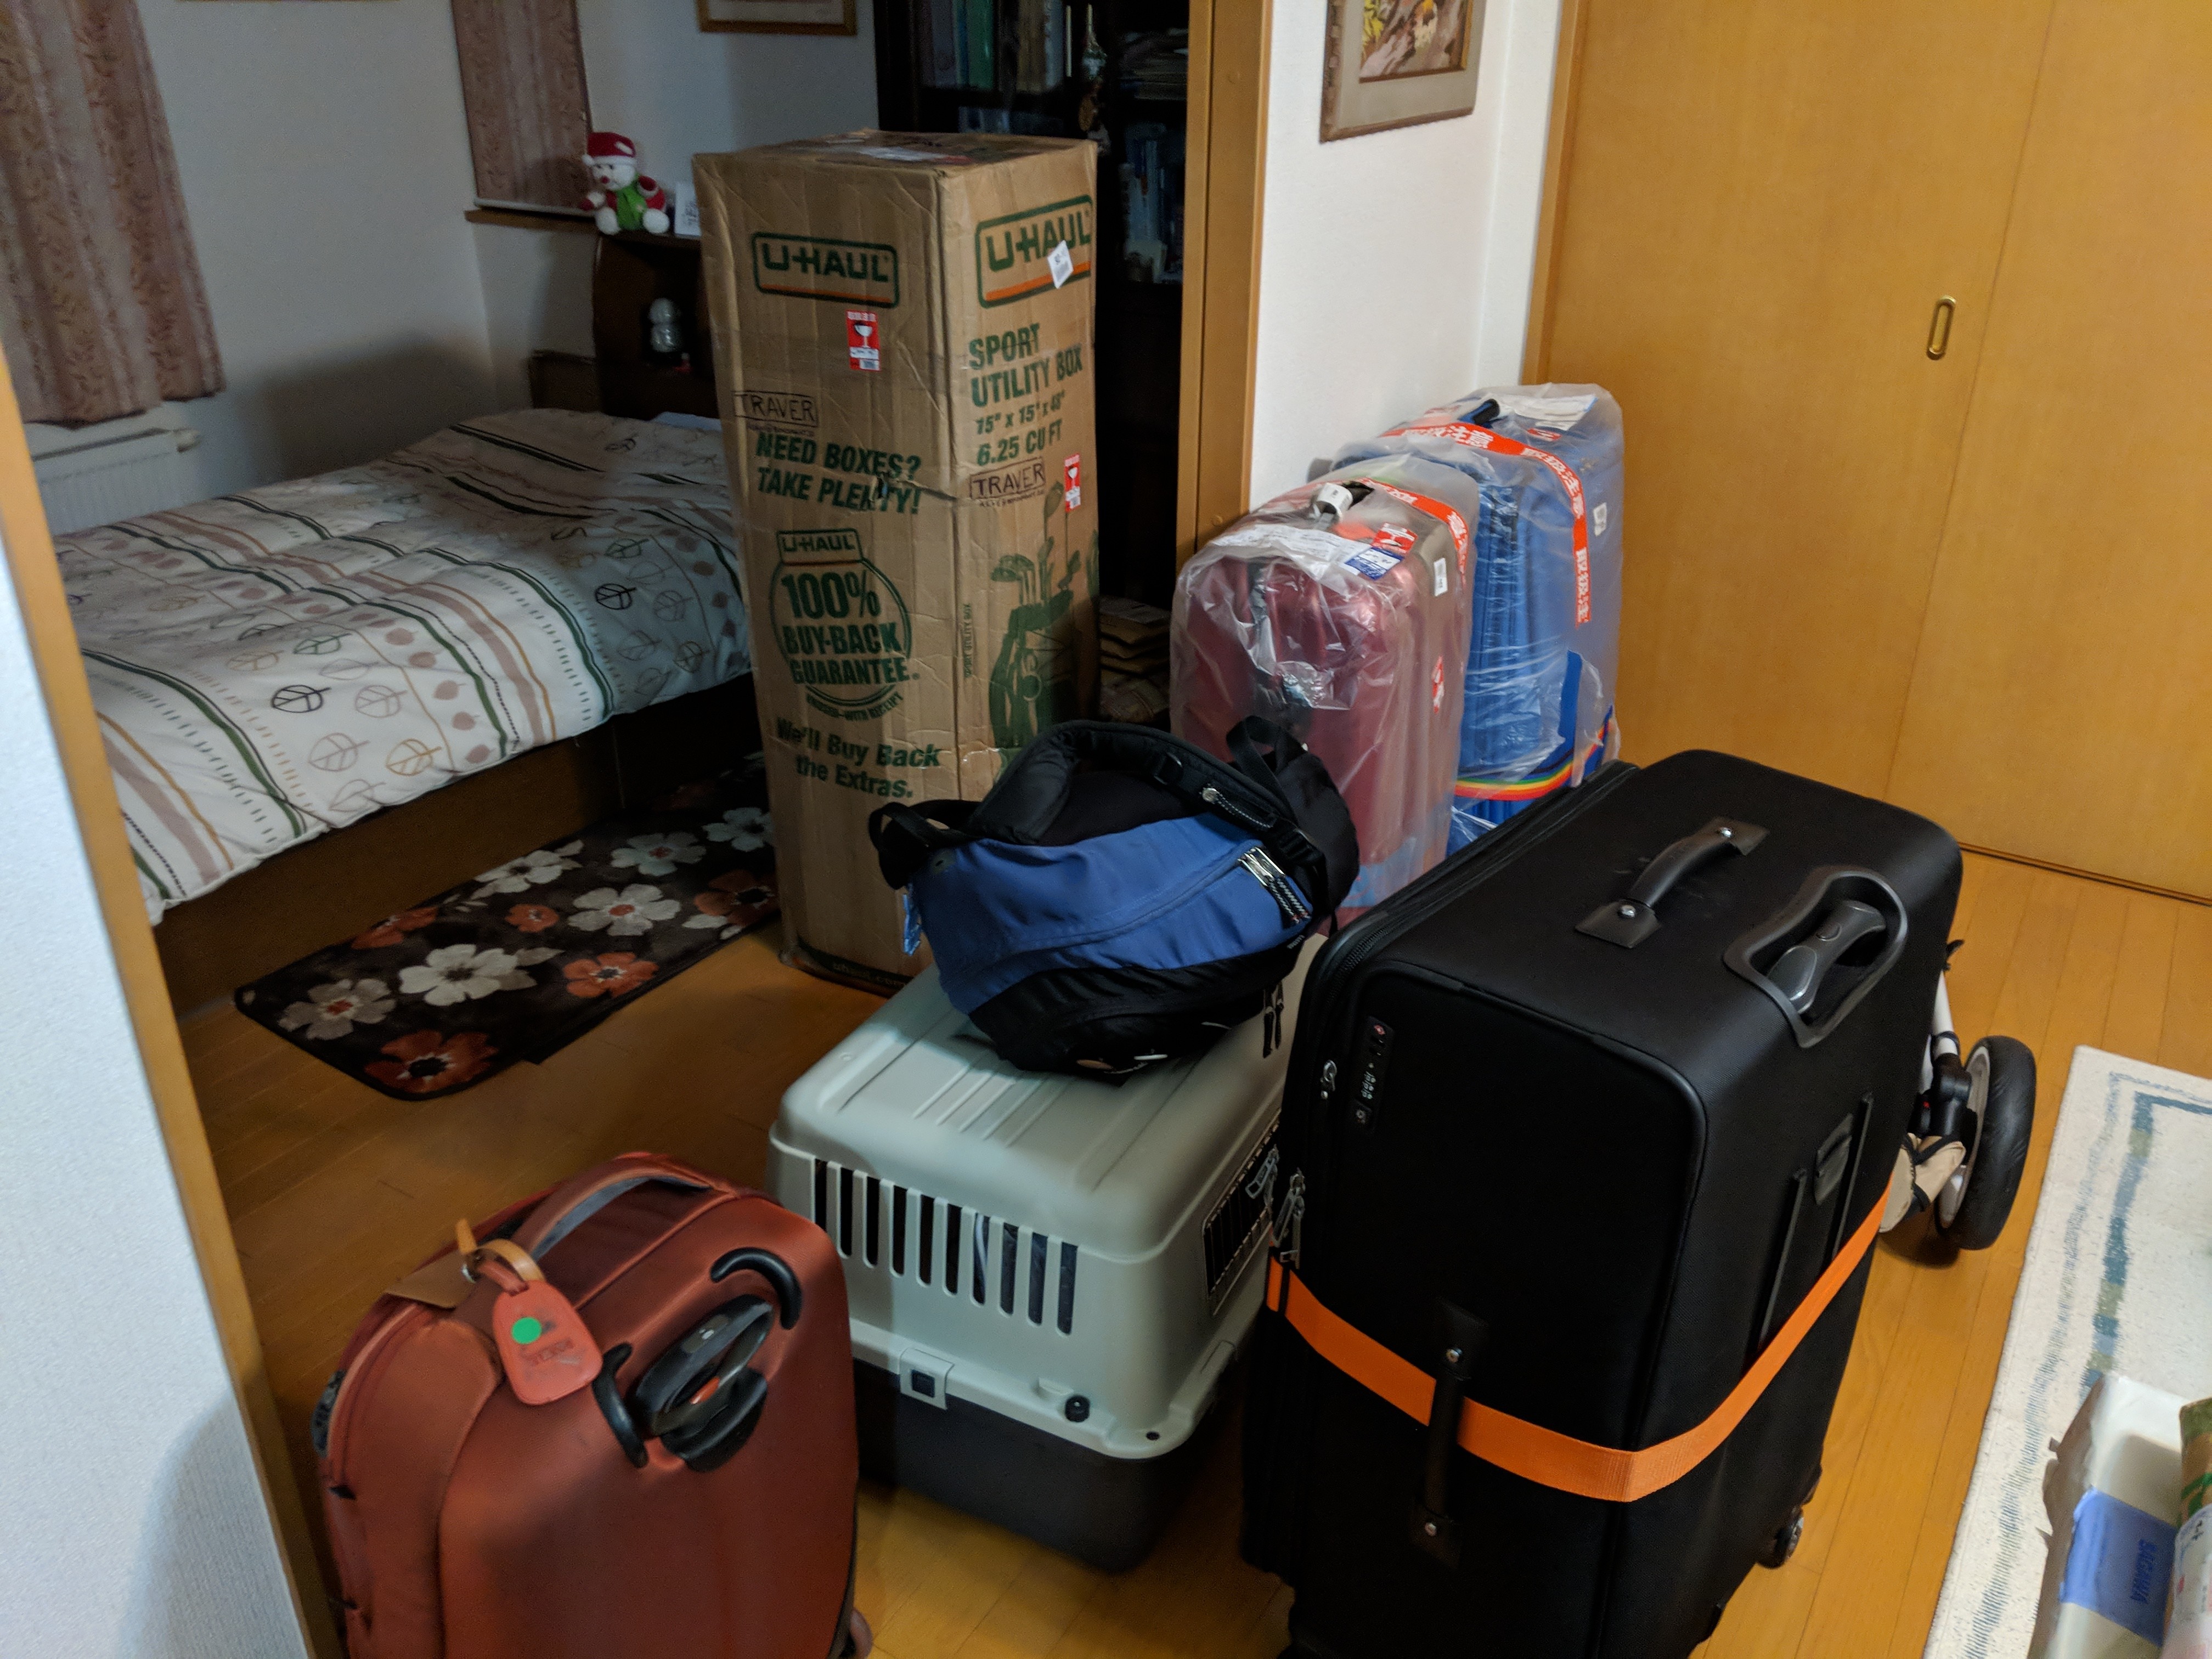 Almost everything we took to Japan